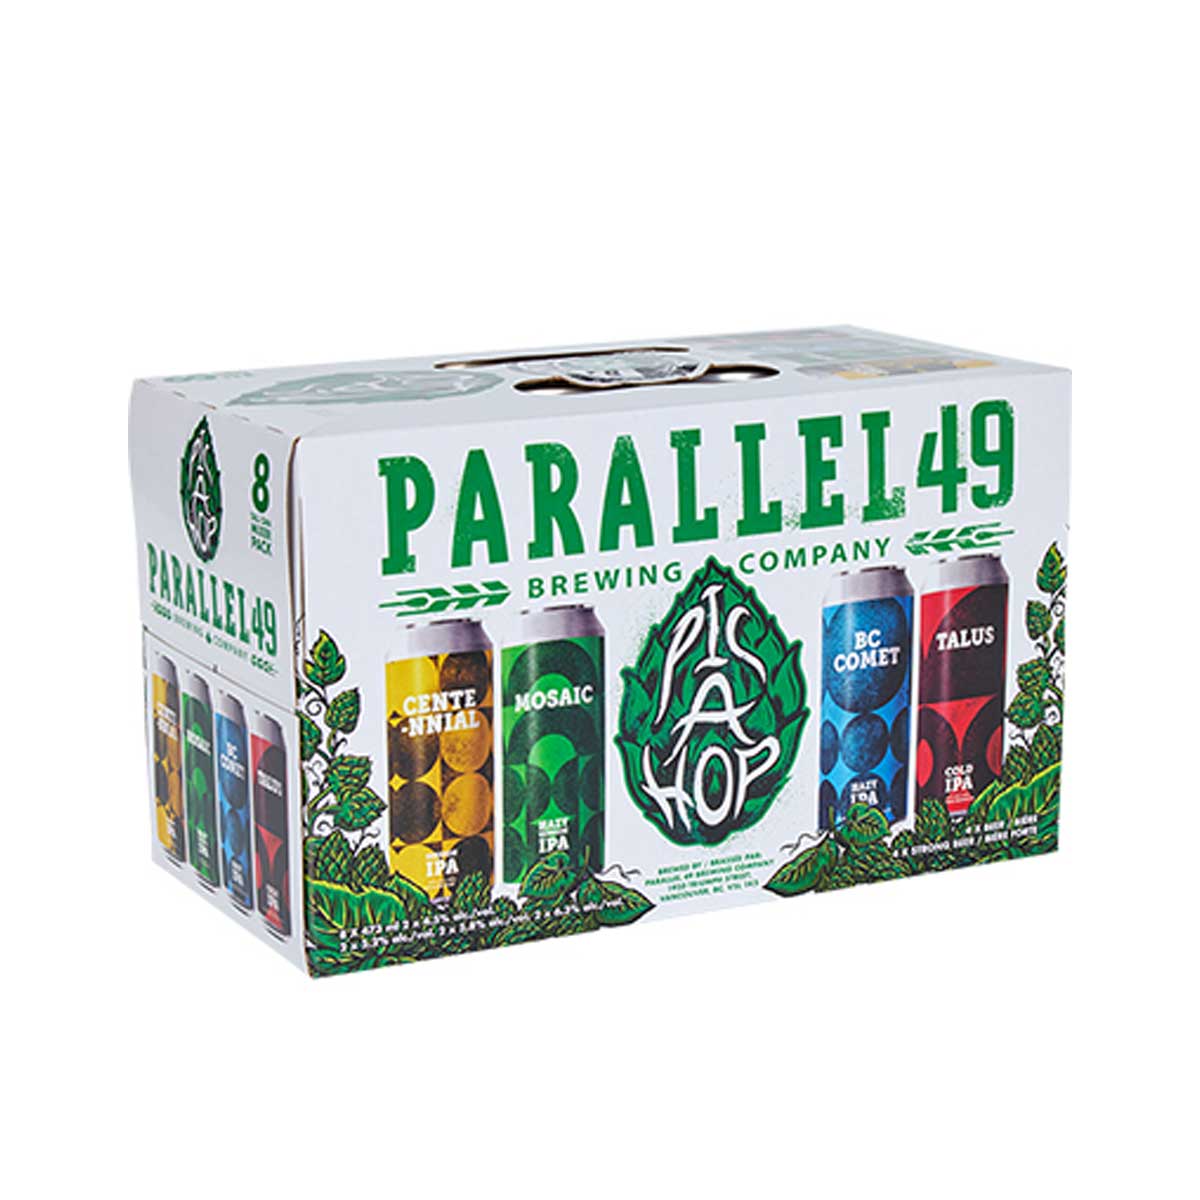 TAG Liquor Stores BC-Parallel 49 Pic A Hop 8 Tall Cans